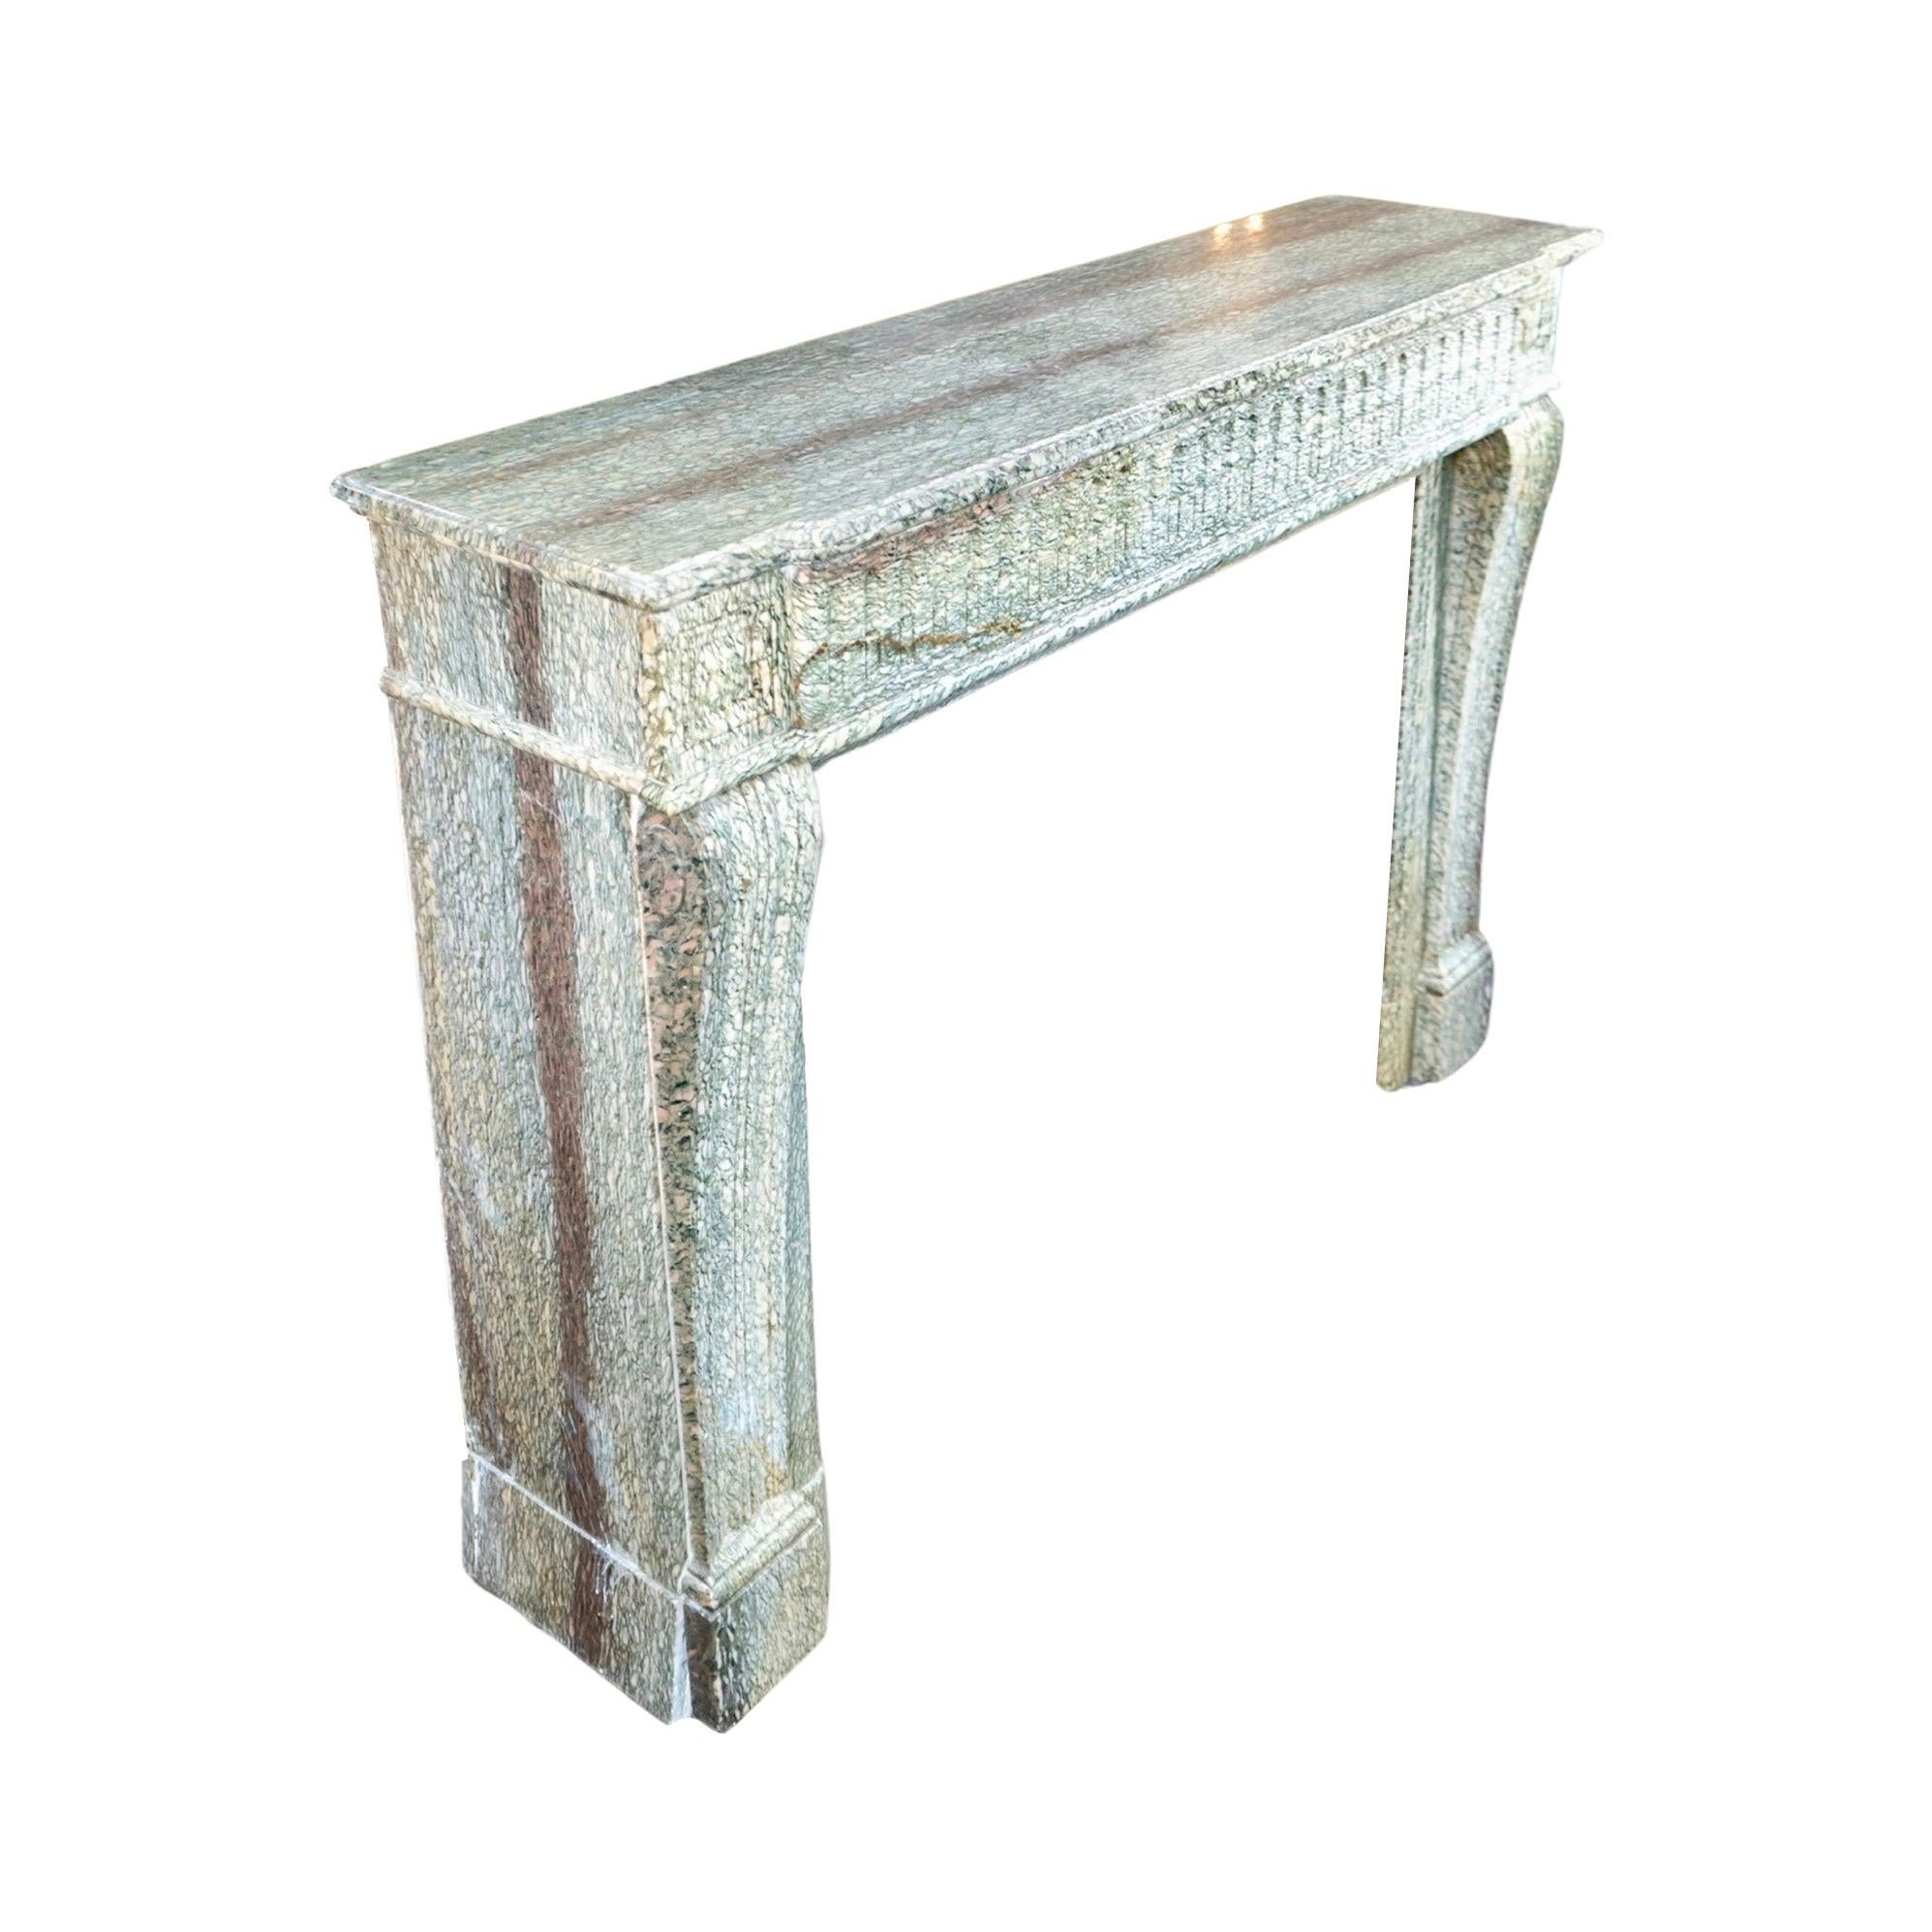 This gorgeous French mantel is crafted with the utmost expertise from Estours Green Marble, with intricate carvings in the distinctive Louis XVI style. A true antique from the 1880s, it celebrates the beauty of traditional French craftsmanship.